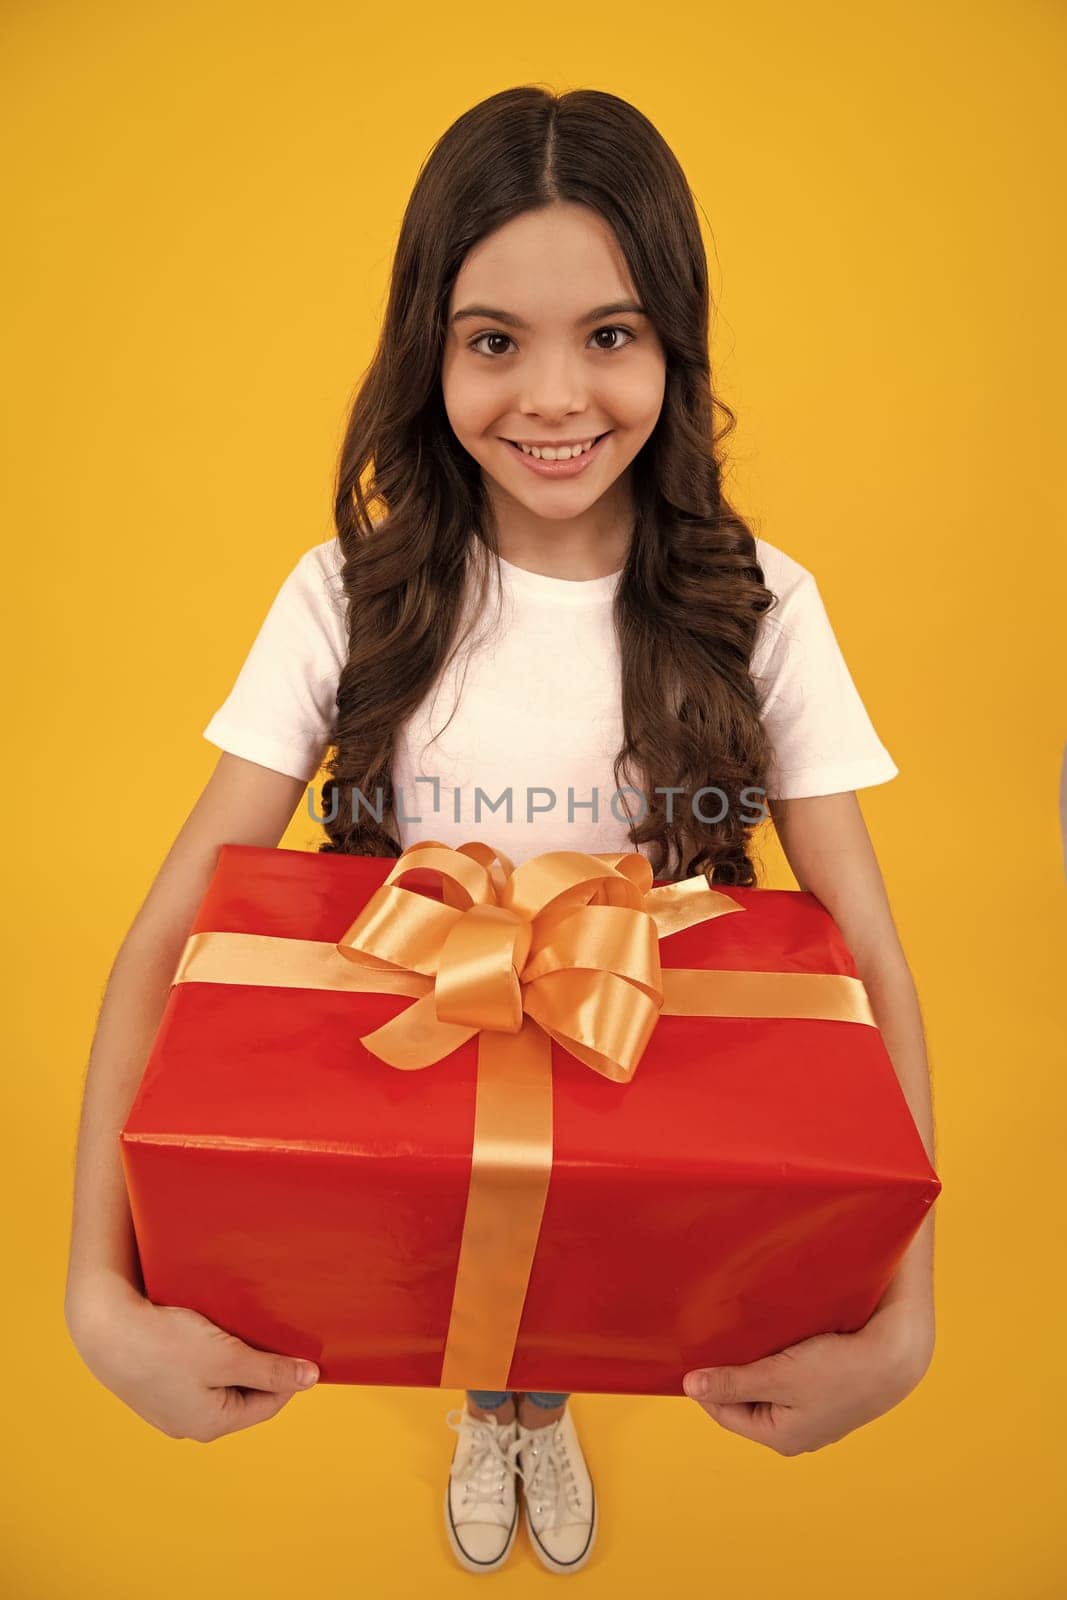 Happy teenager, positive and smiling emotions of teen girl. Teenager child in t shirt holding gift box on yellow isolated background. Gift for kids birthday. Summer holiday